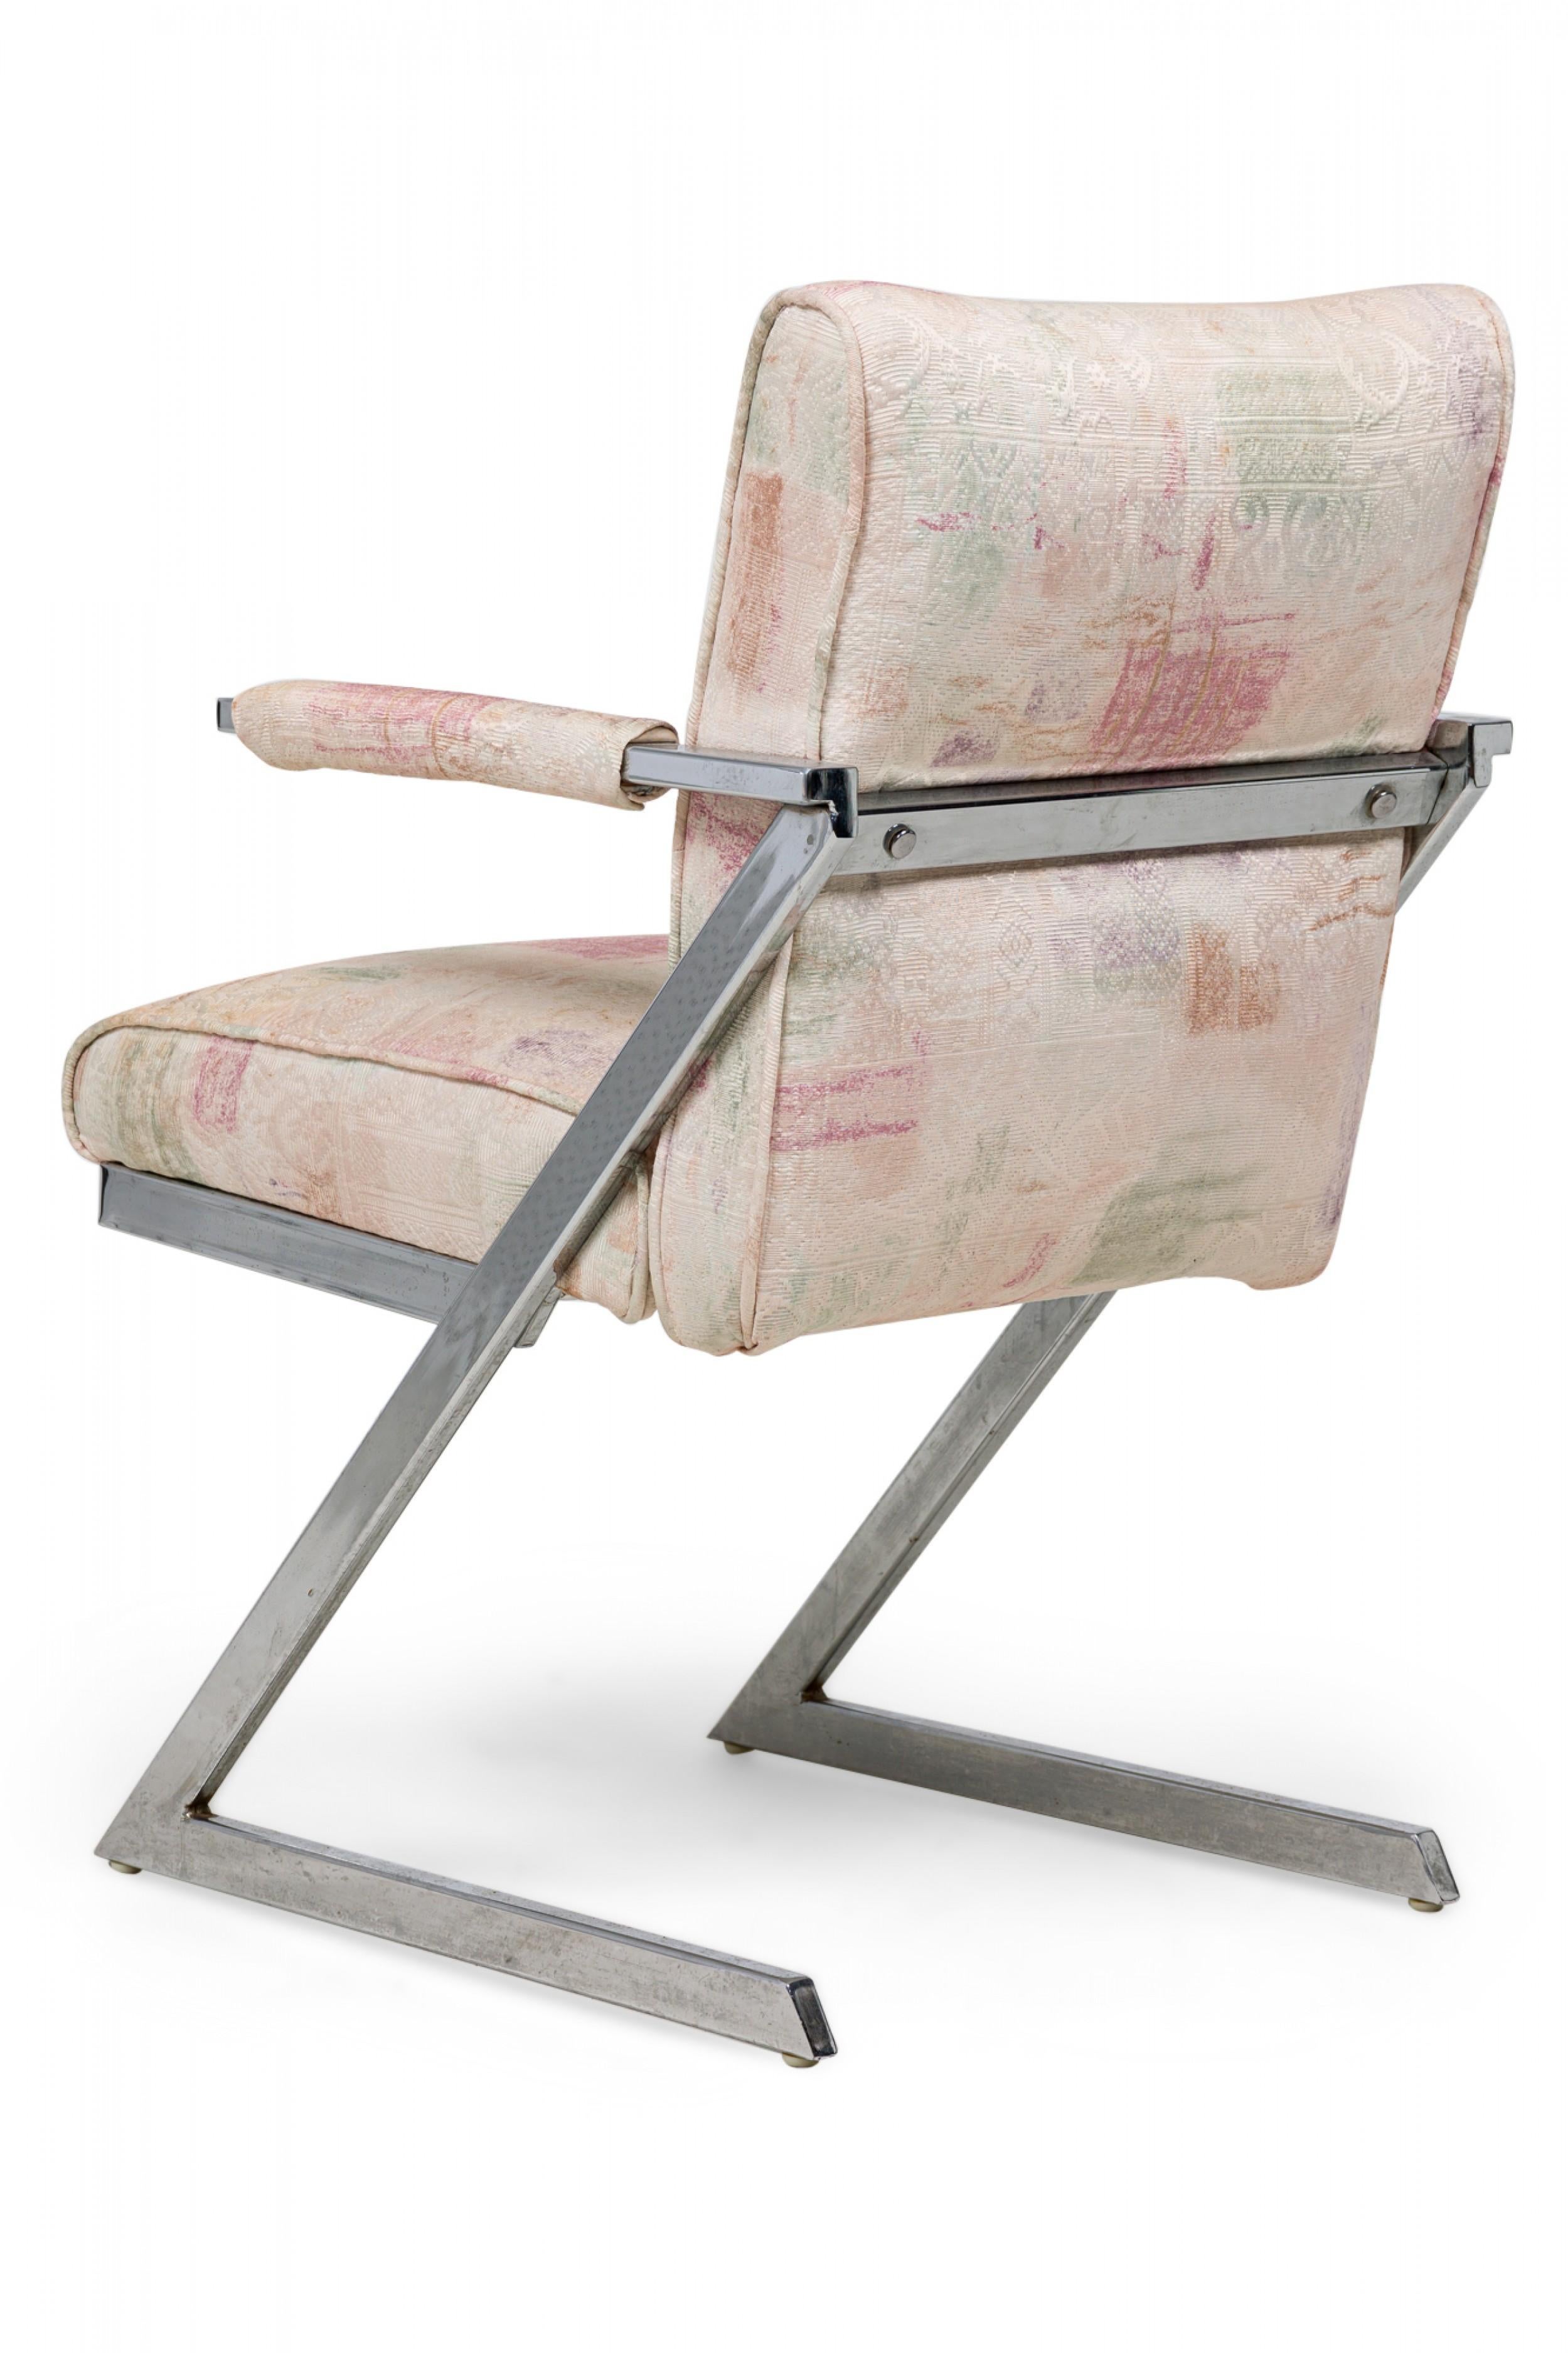 20th Century Set of 6 Dia Midcentury American Chrome Z Chairs in Beige and Pastel Upholstery For Sale